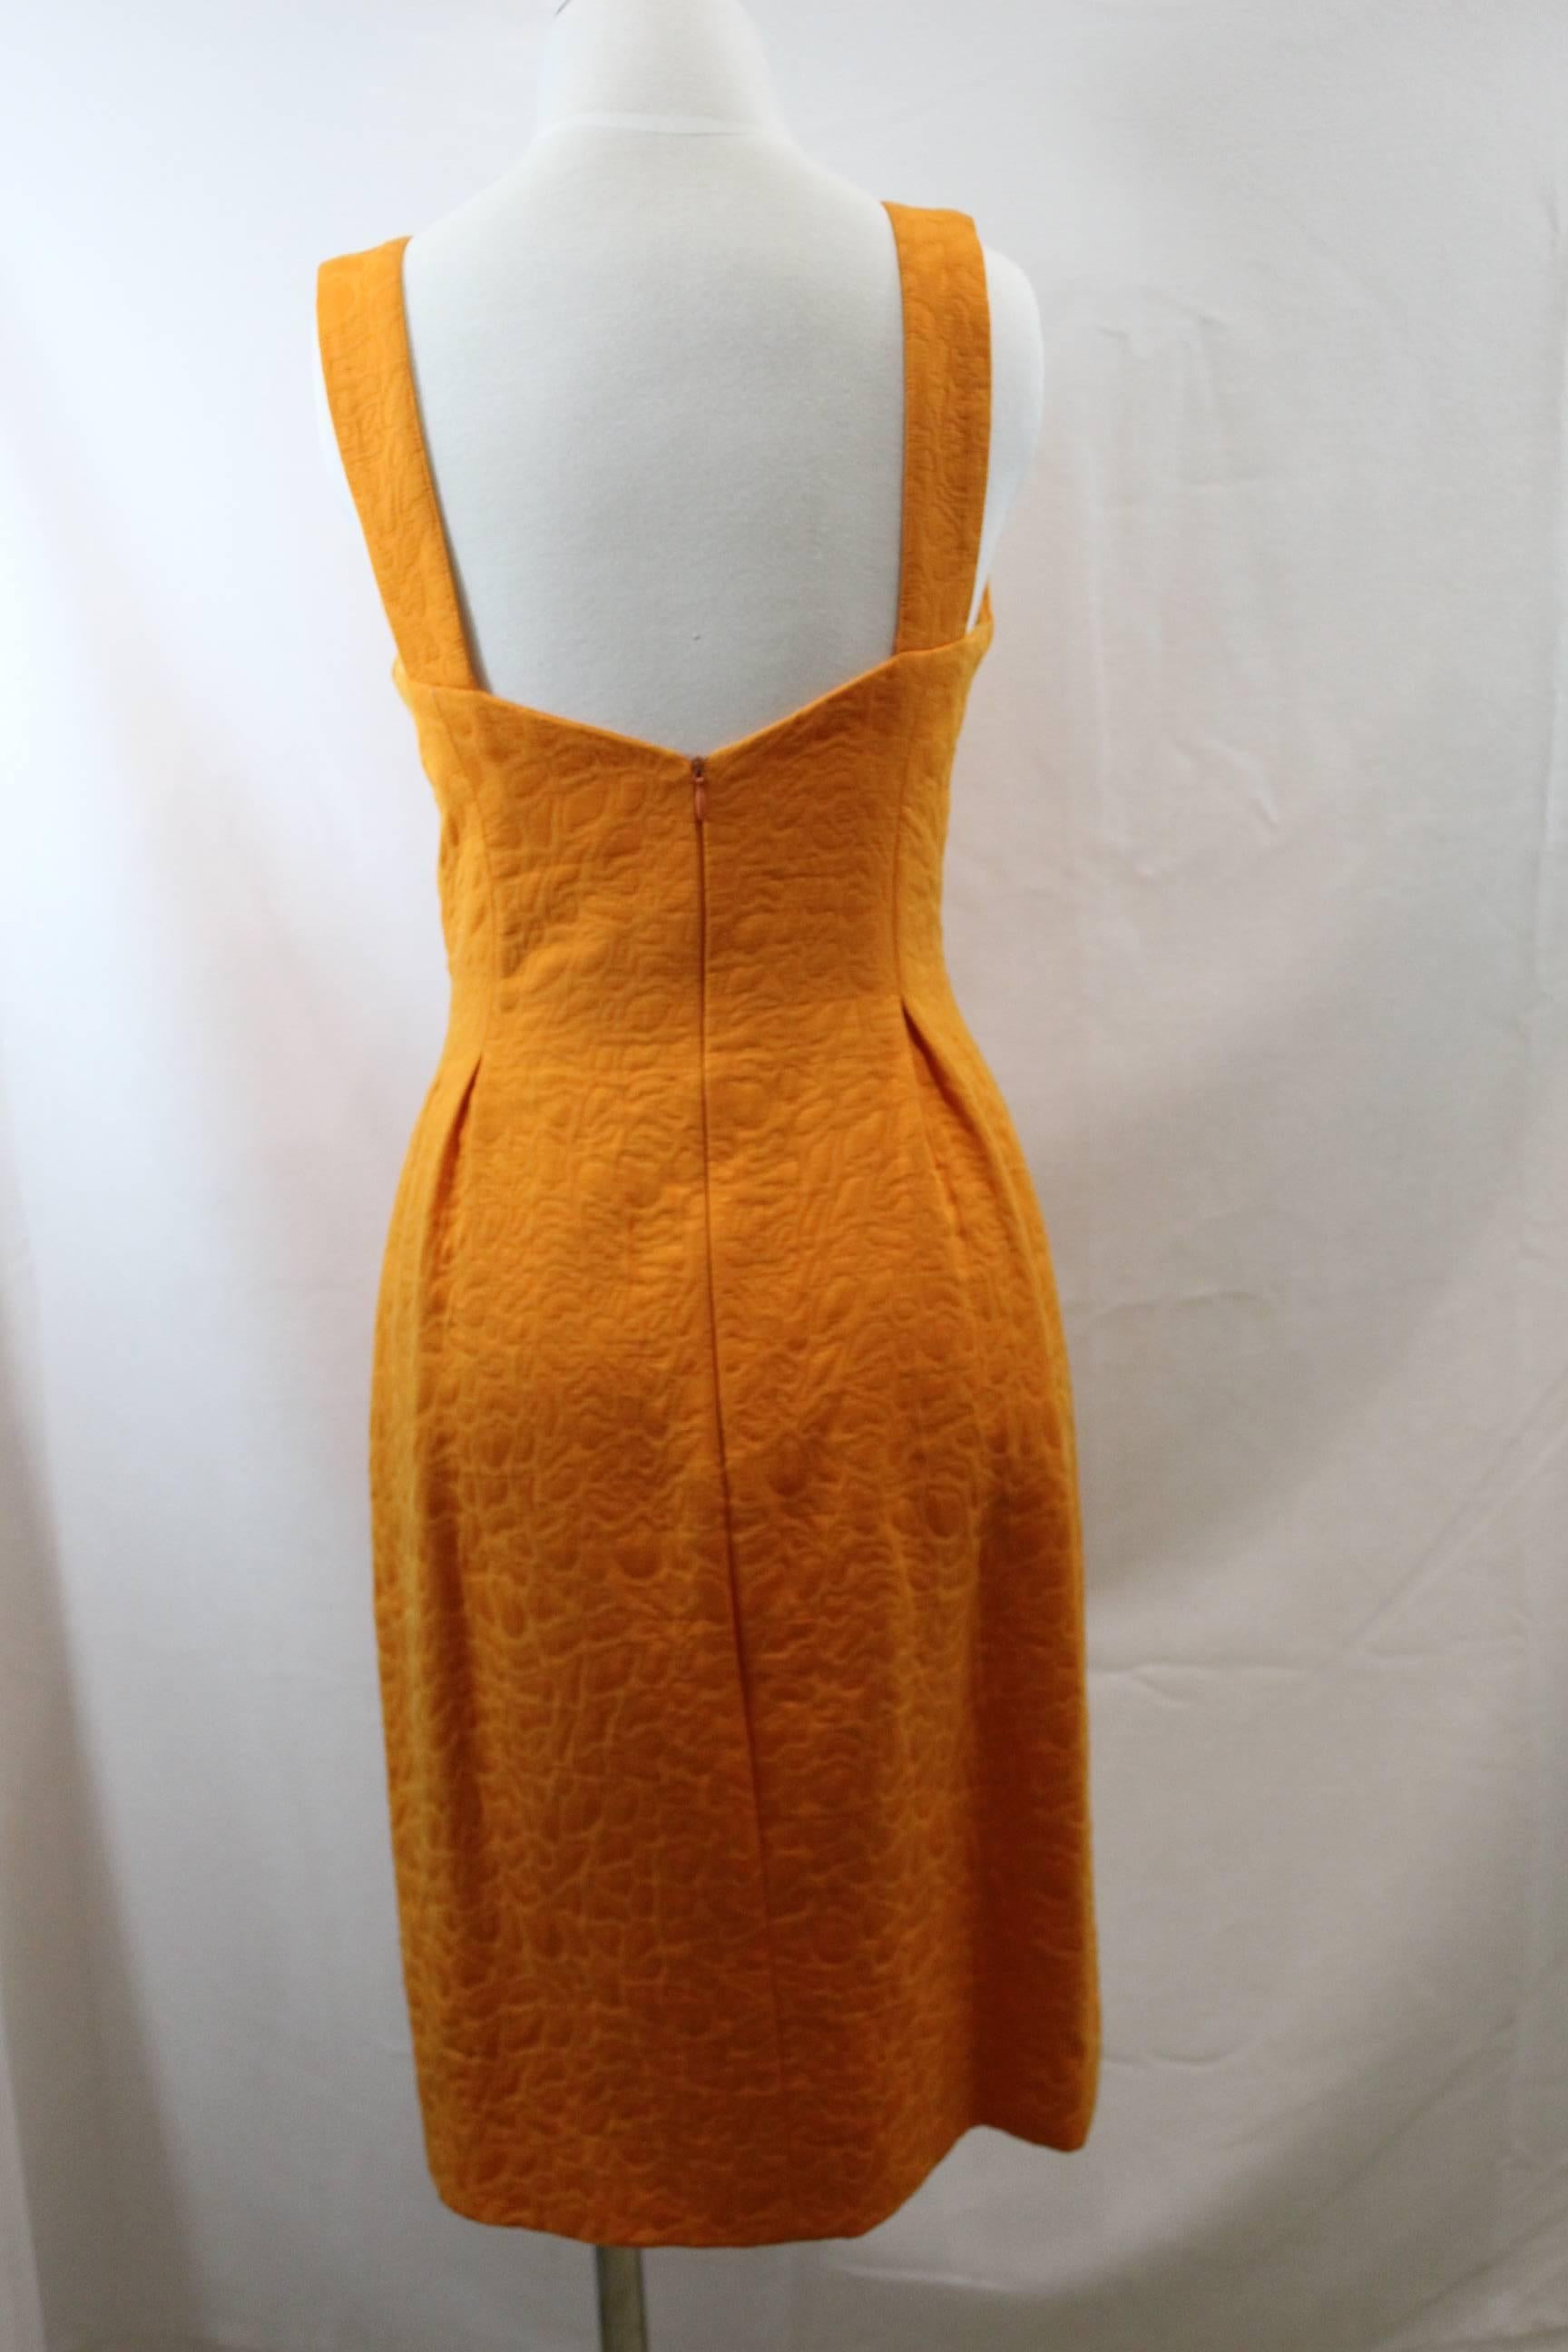 Nice Vintage balenciaga dress with its jacket and belt. Dress in nice orange with croco pattern.

Size EU 40

The dress is in good conditon but it shownssome wear in the inner collar (probably from make up that can be removed)  but no visible